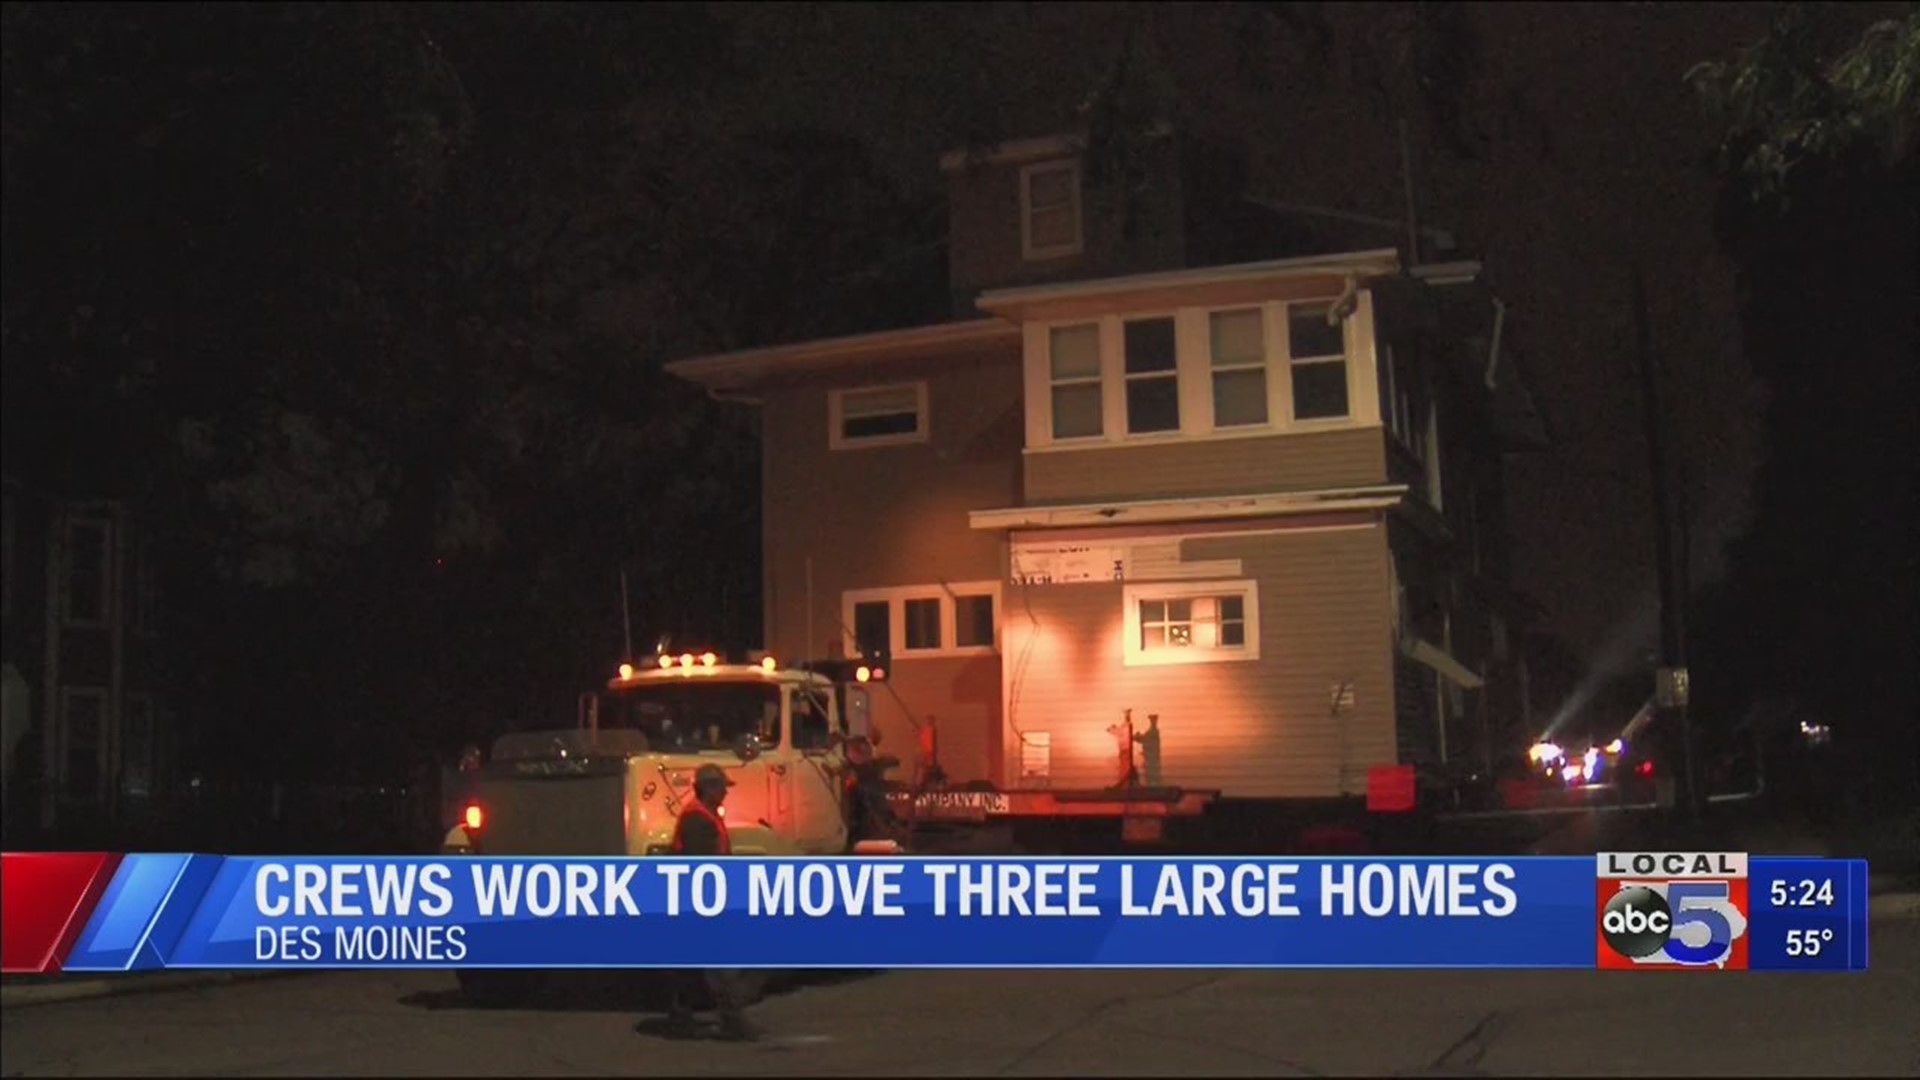 Three large homes moved in Des Moines